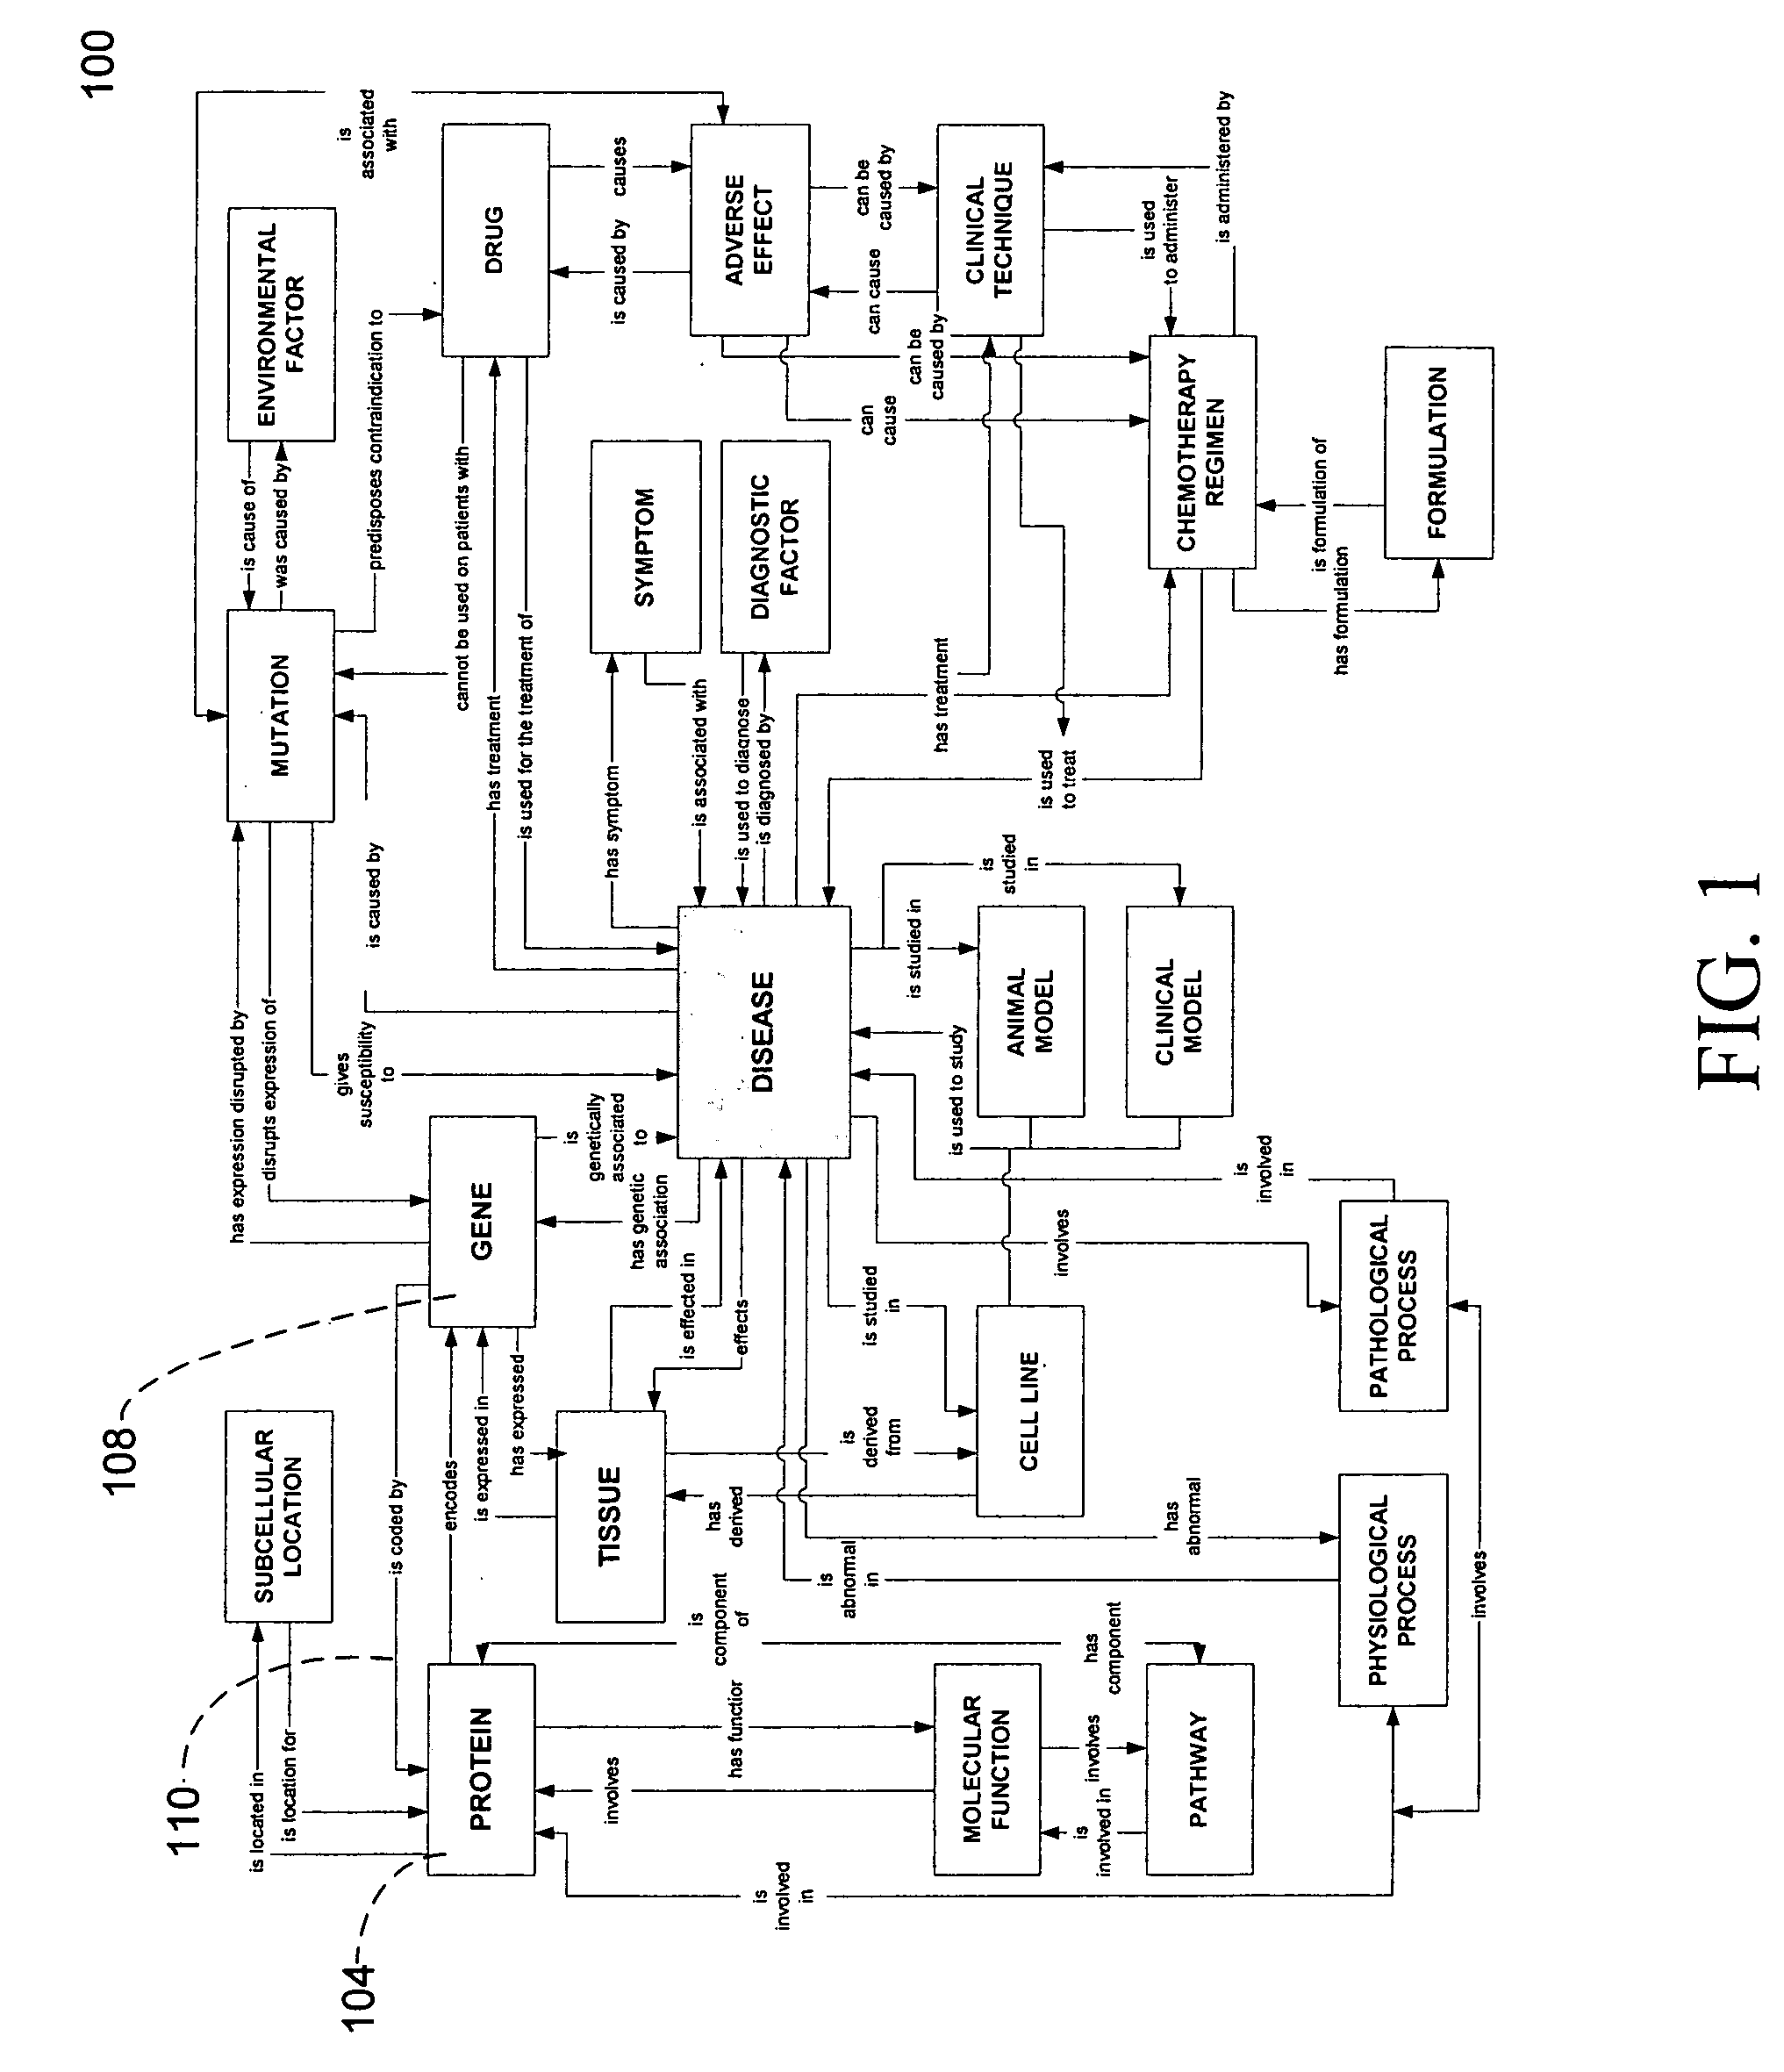 System and method for parsing and/or exporting data from one or more multi-relational ontologies